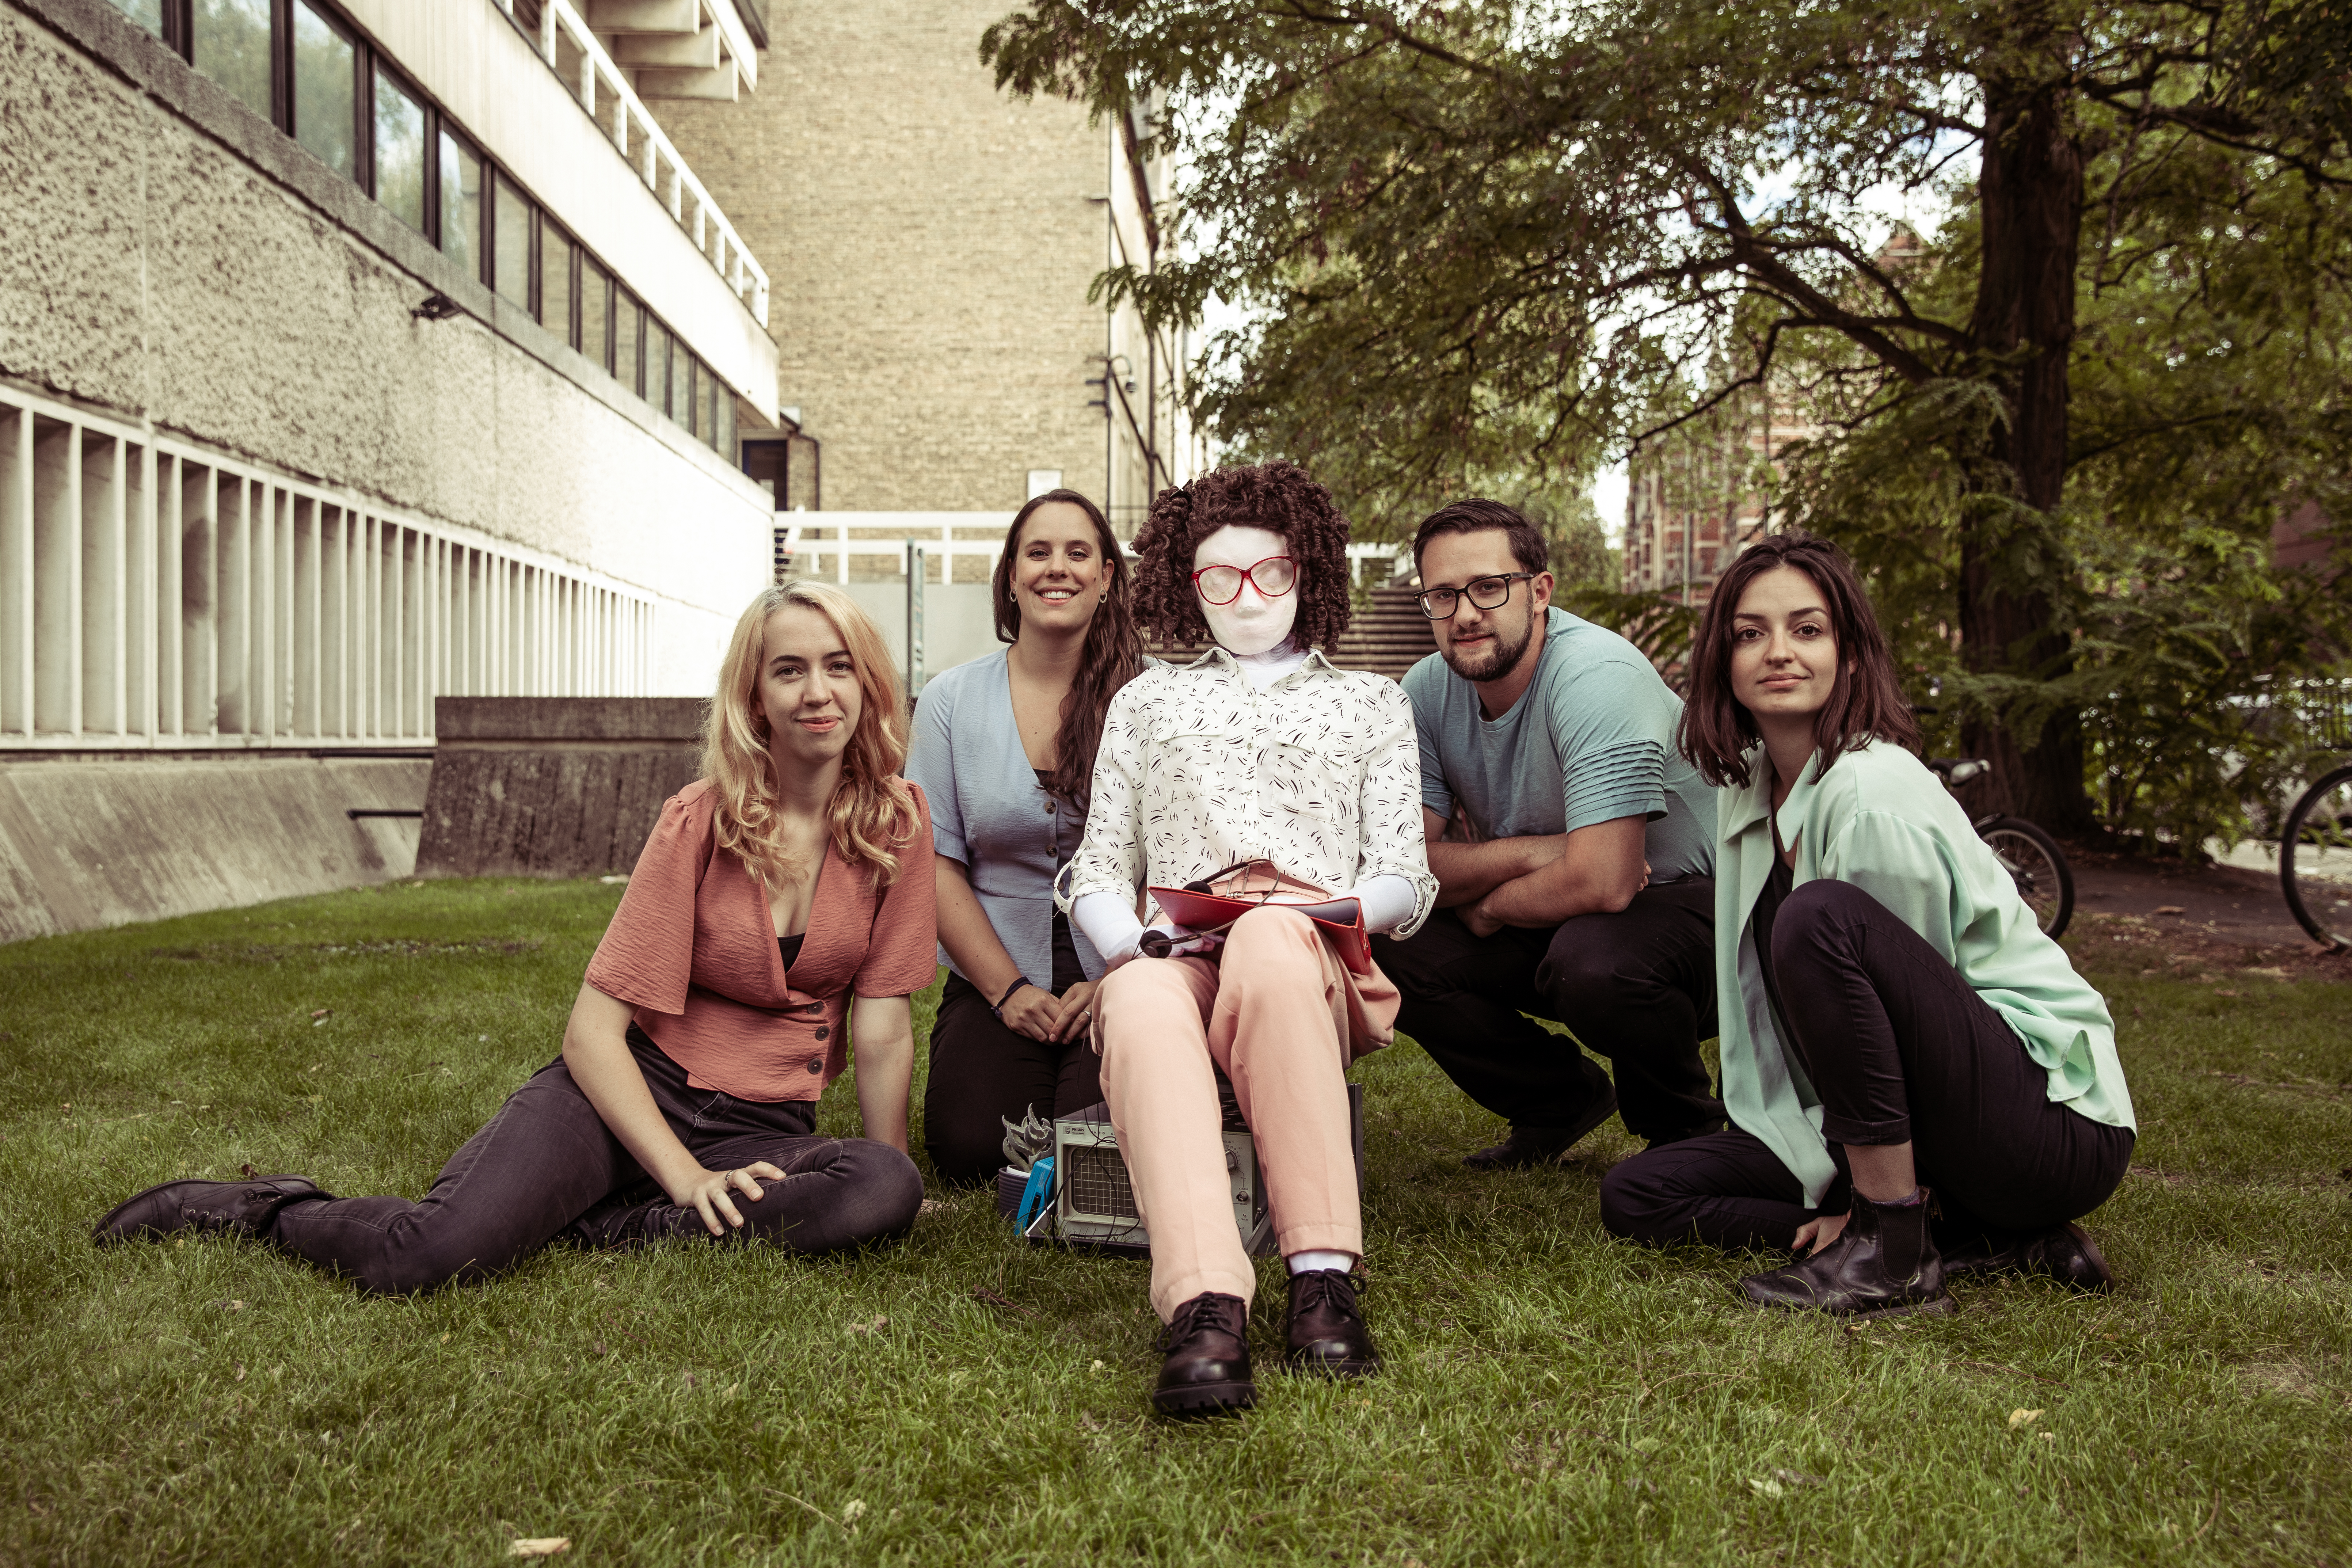 The full cast of Flux sits on the grass outside a grey, concrete building. On the far left is Hattie, with blonde hair and peach top, then Molly with long brown hair and a pastel blue top, full sized puppet Kate sits in the middle, with big 80s glasses and a tight perm. Next to Kate is Matt with short brown hair and a light blue top and he is next to Anne with shoulder length brown hair and a light green shirt.